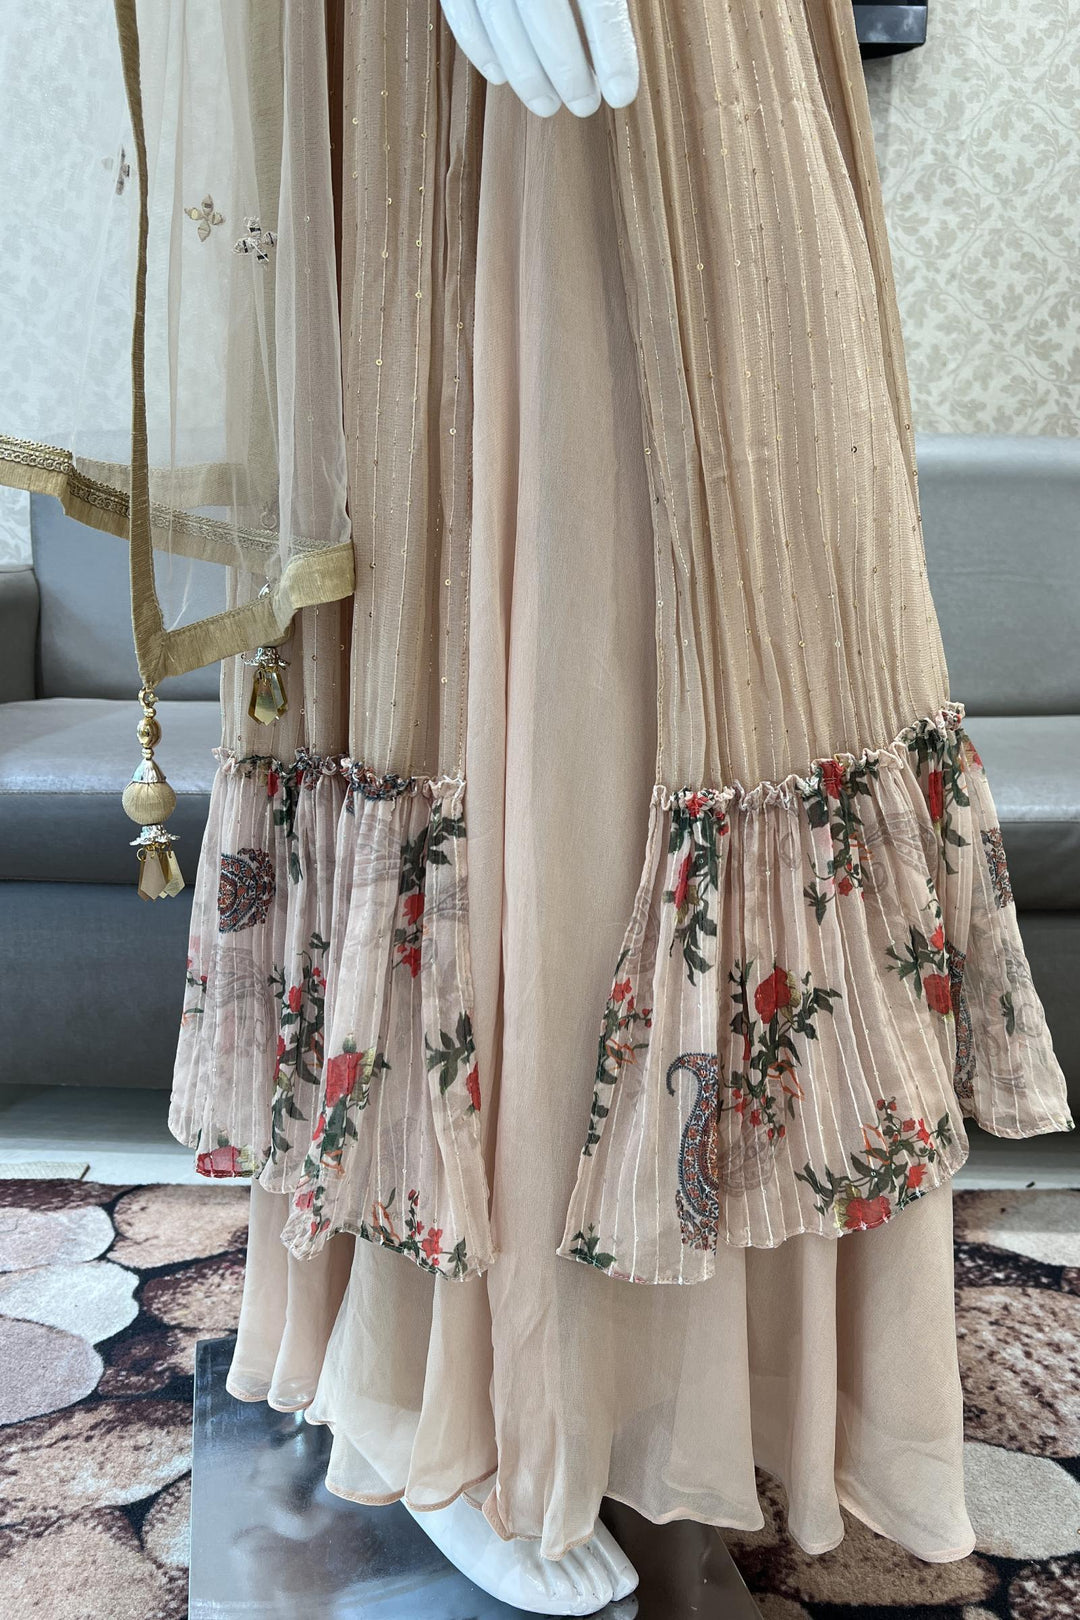 Beige Multicolor Embroidery, Stone, Sequins and Thread work Salwar Suit with Palazzo Pants - Seasons Chennai